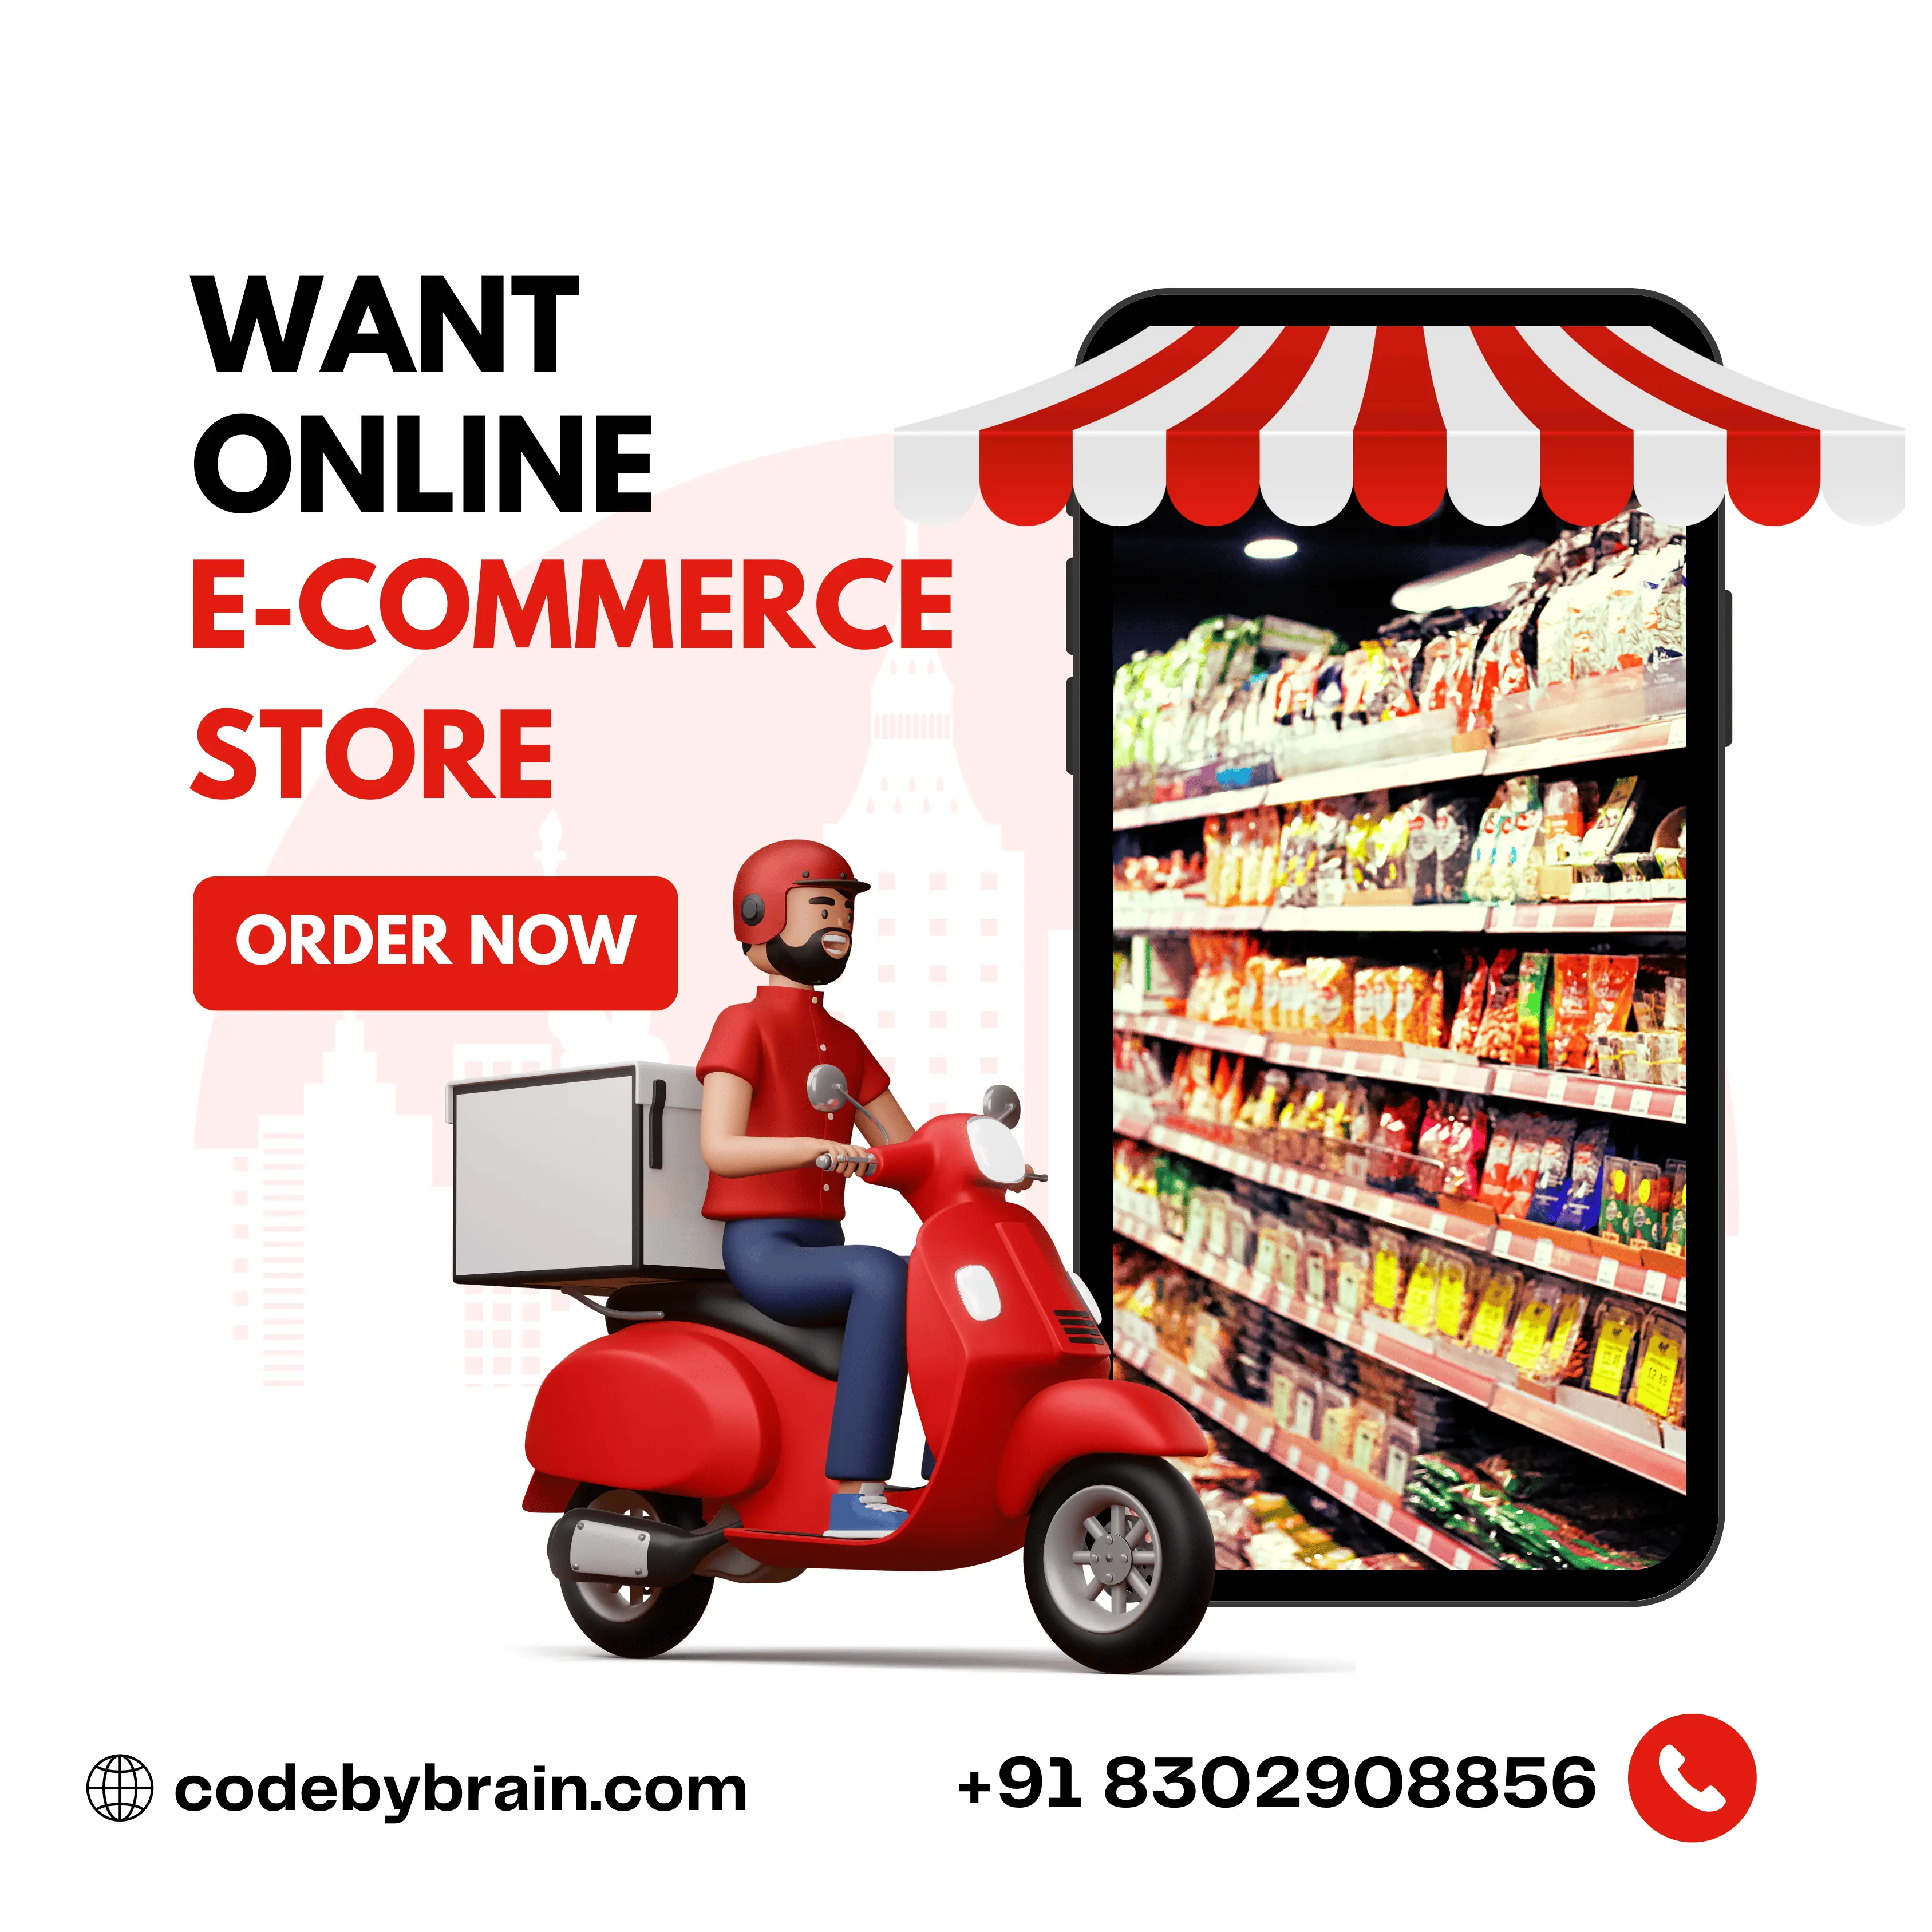 Make Whole Online E-Commerce Store From Scratch With Code By Brain